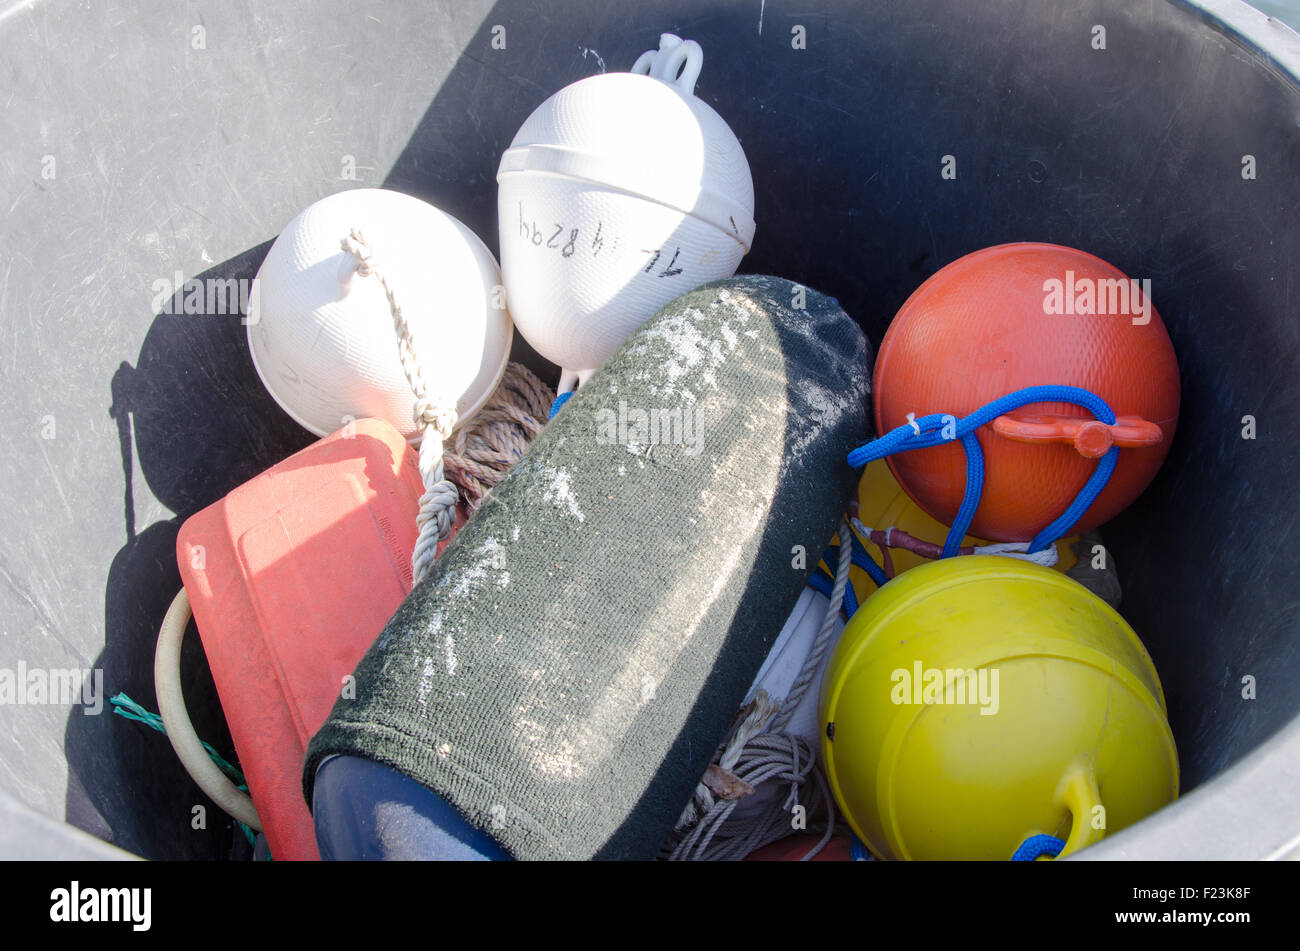 Colored buoys in a tray Stock Photo